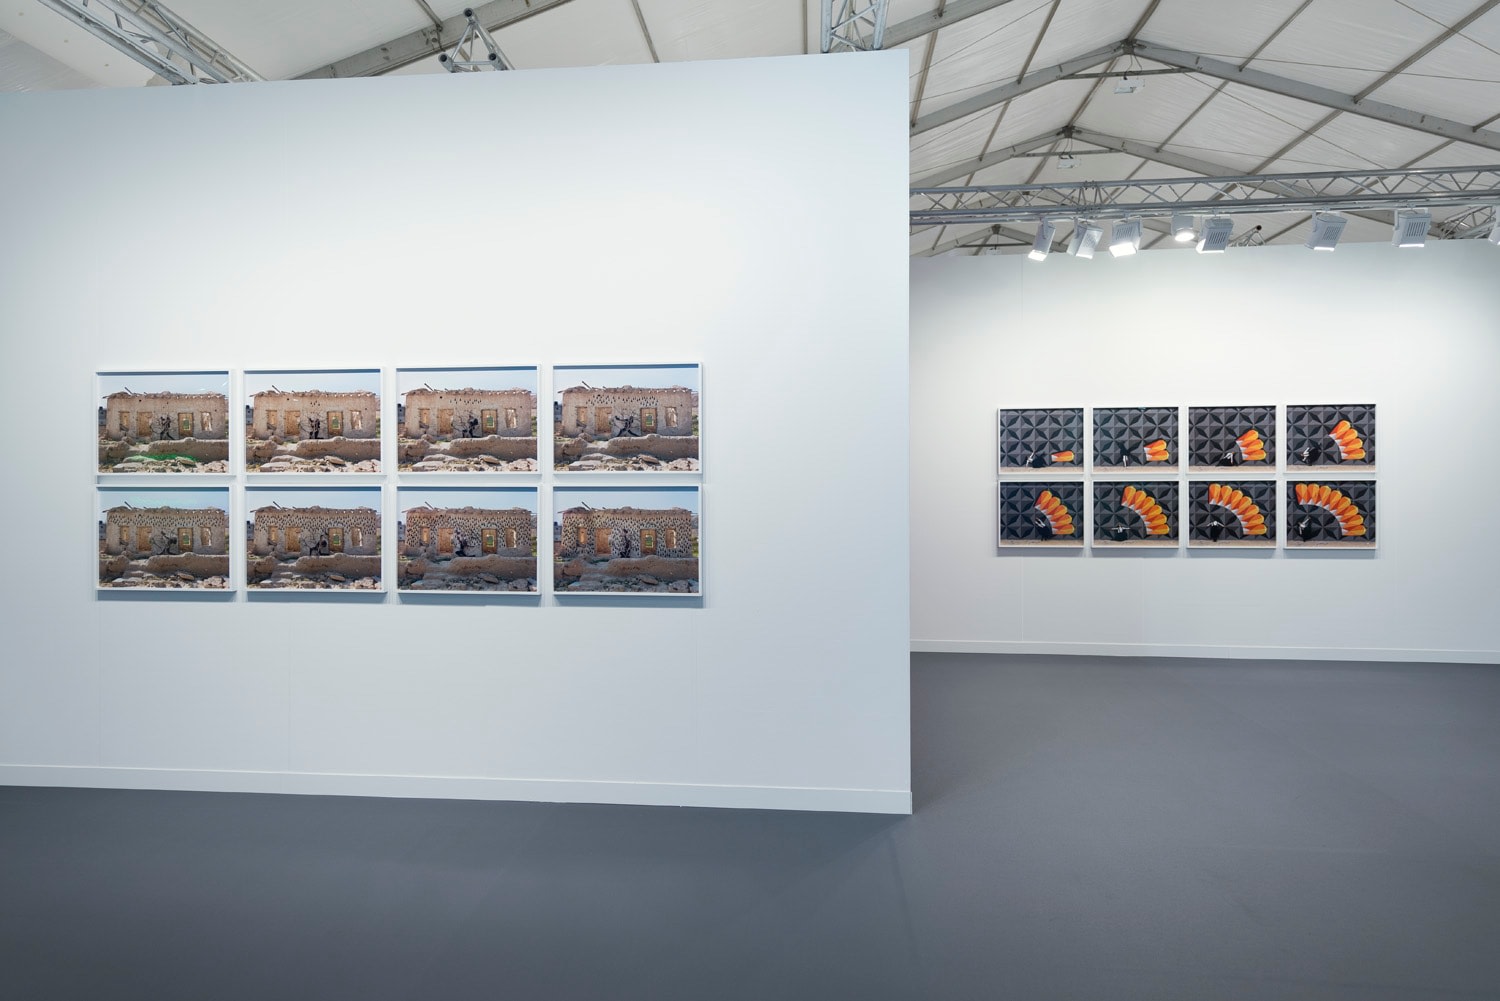 Installation view of Lehmann Maupin's booth at Frieze art fair in London 2019, view 5